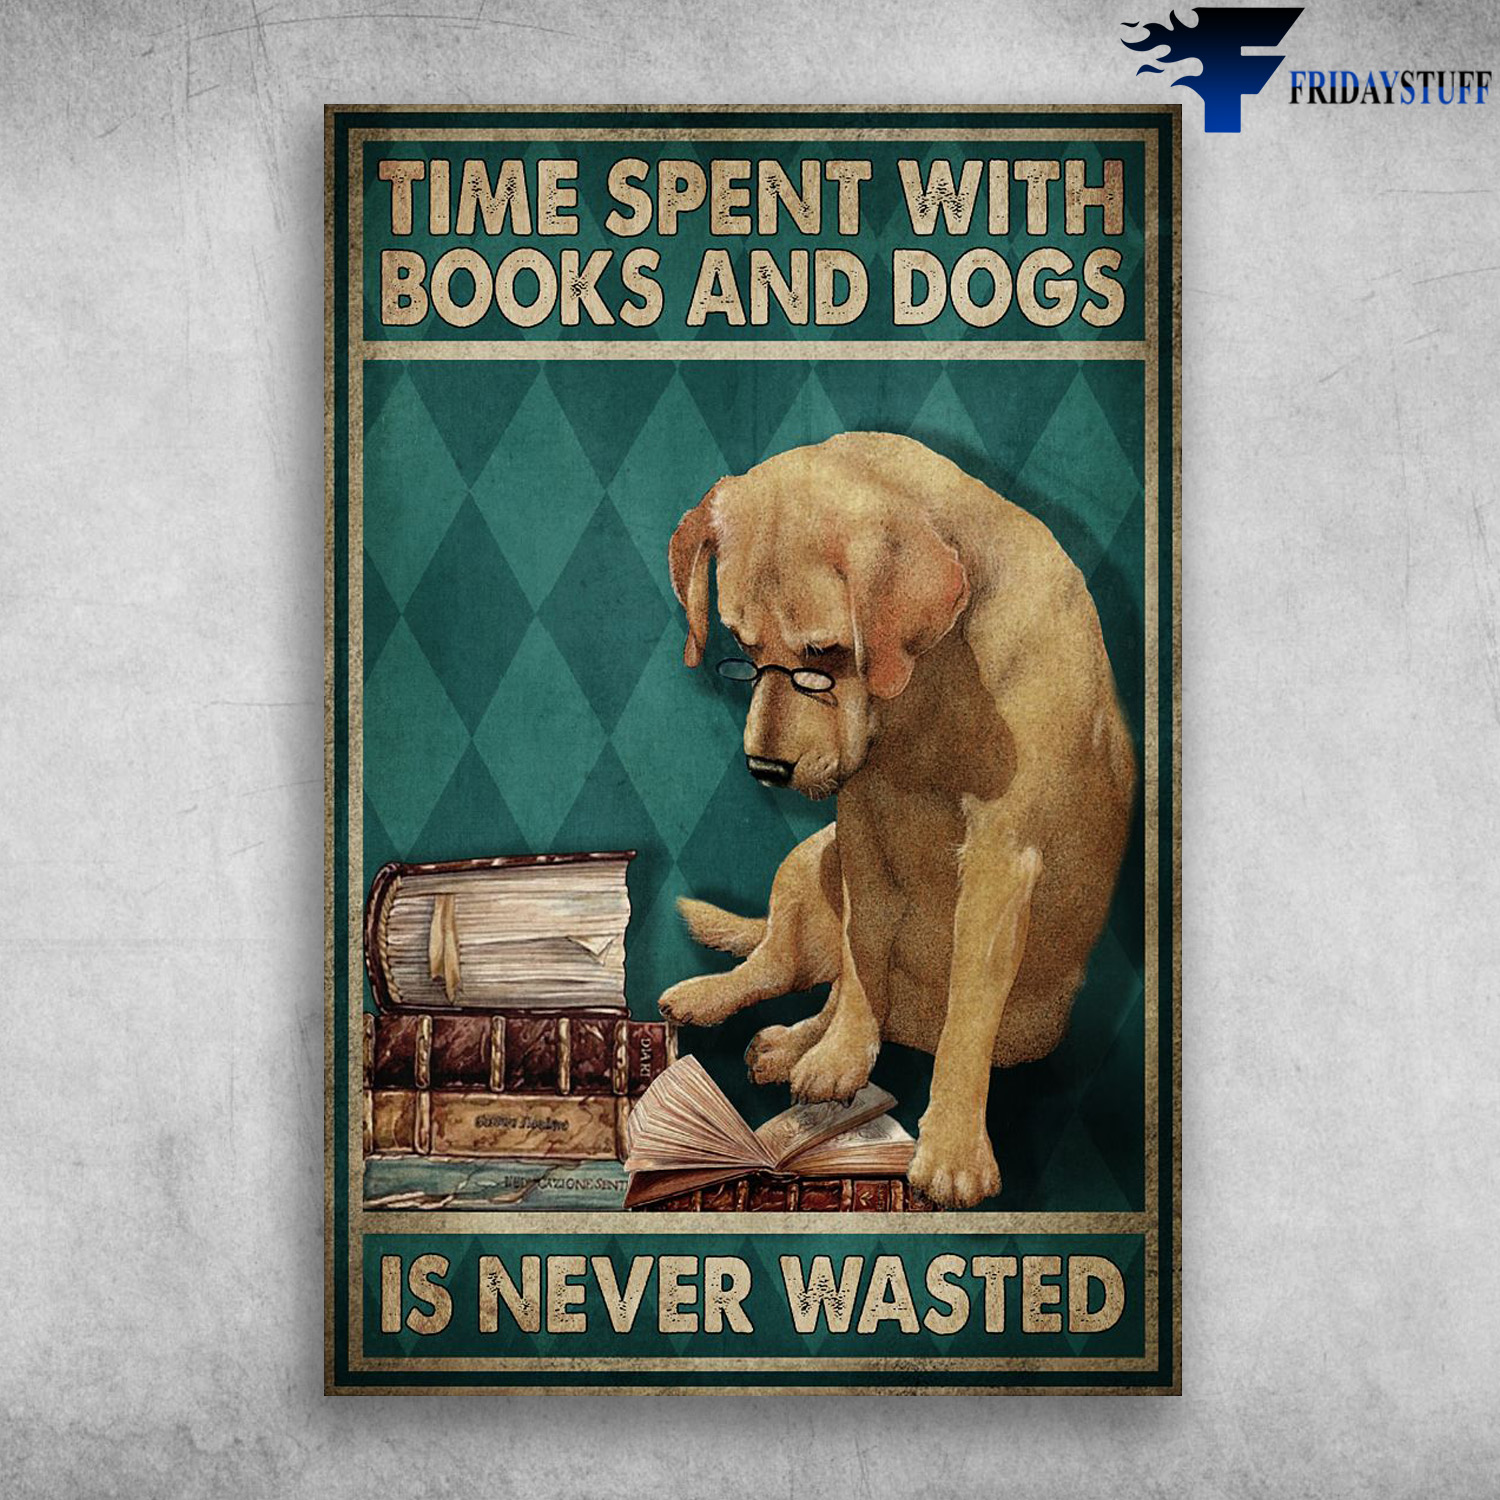 Golden Retriever Reading Book - Time Spent With Books And Dogs, Is Never Wasted